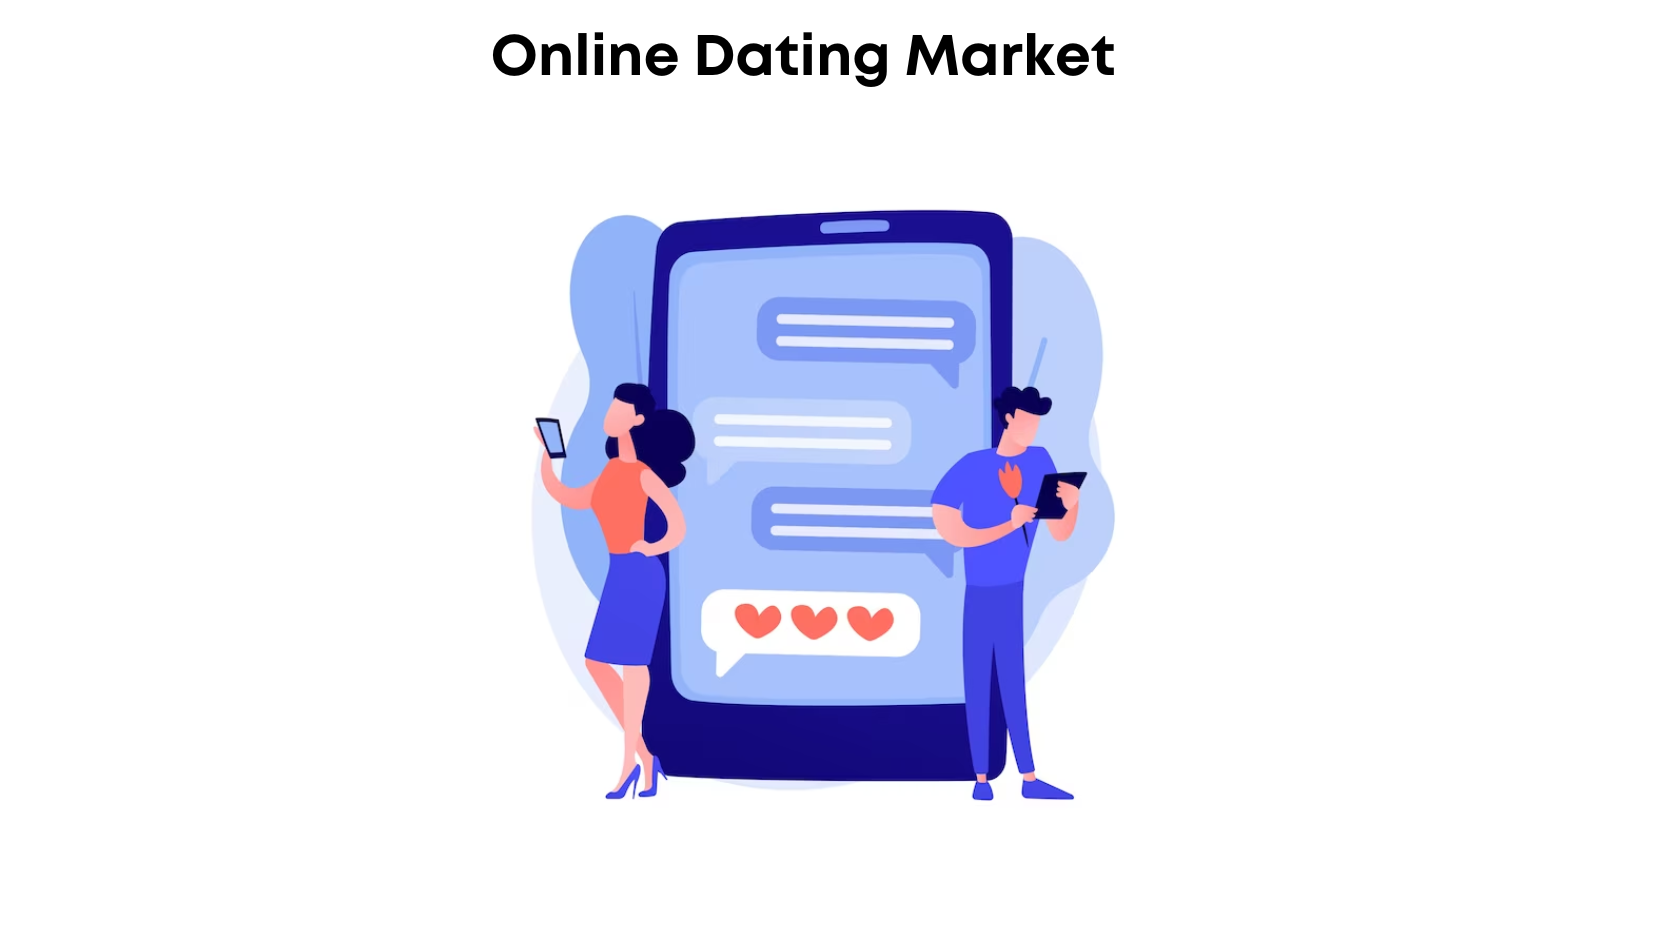 [Latest] Online Dating Market Size, Forecast, Analysis and Share Surpass USD 23.80 Billion ~2032, At 9.20% CAGR